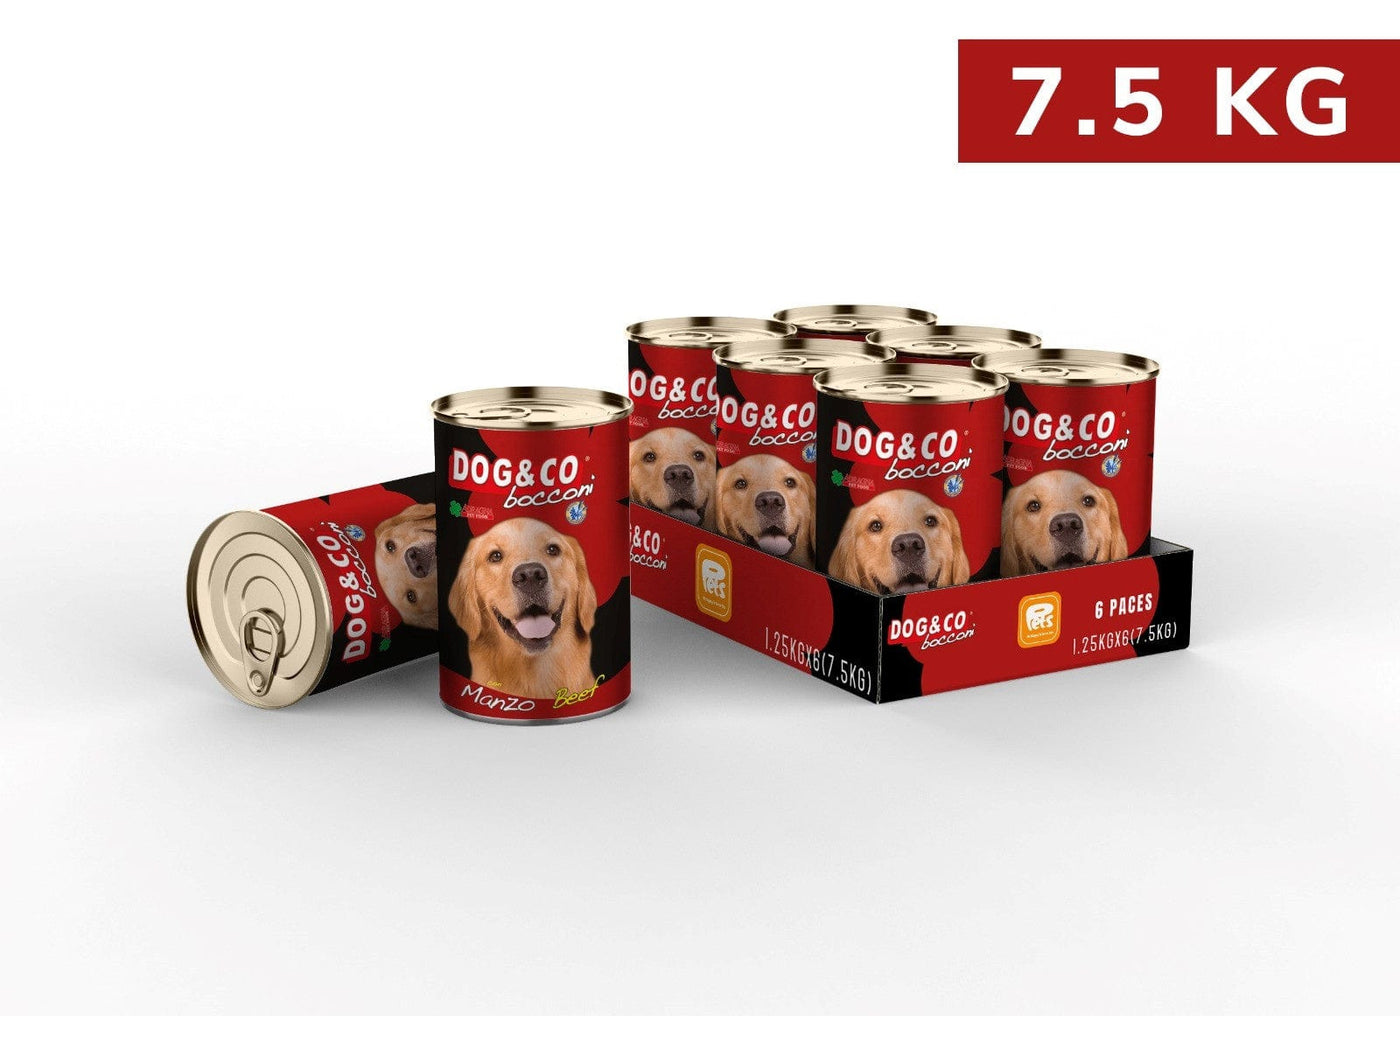 Dog&Co Beef 1.25kgX6cans